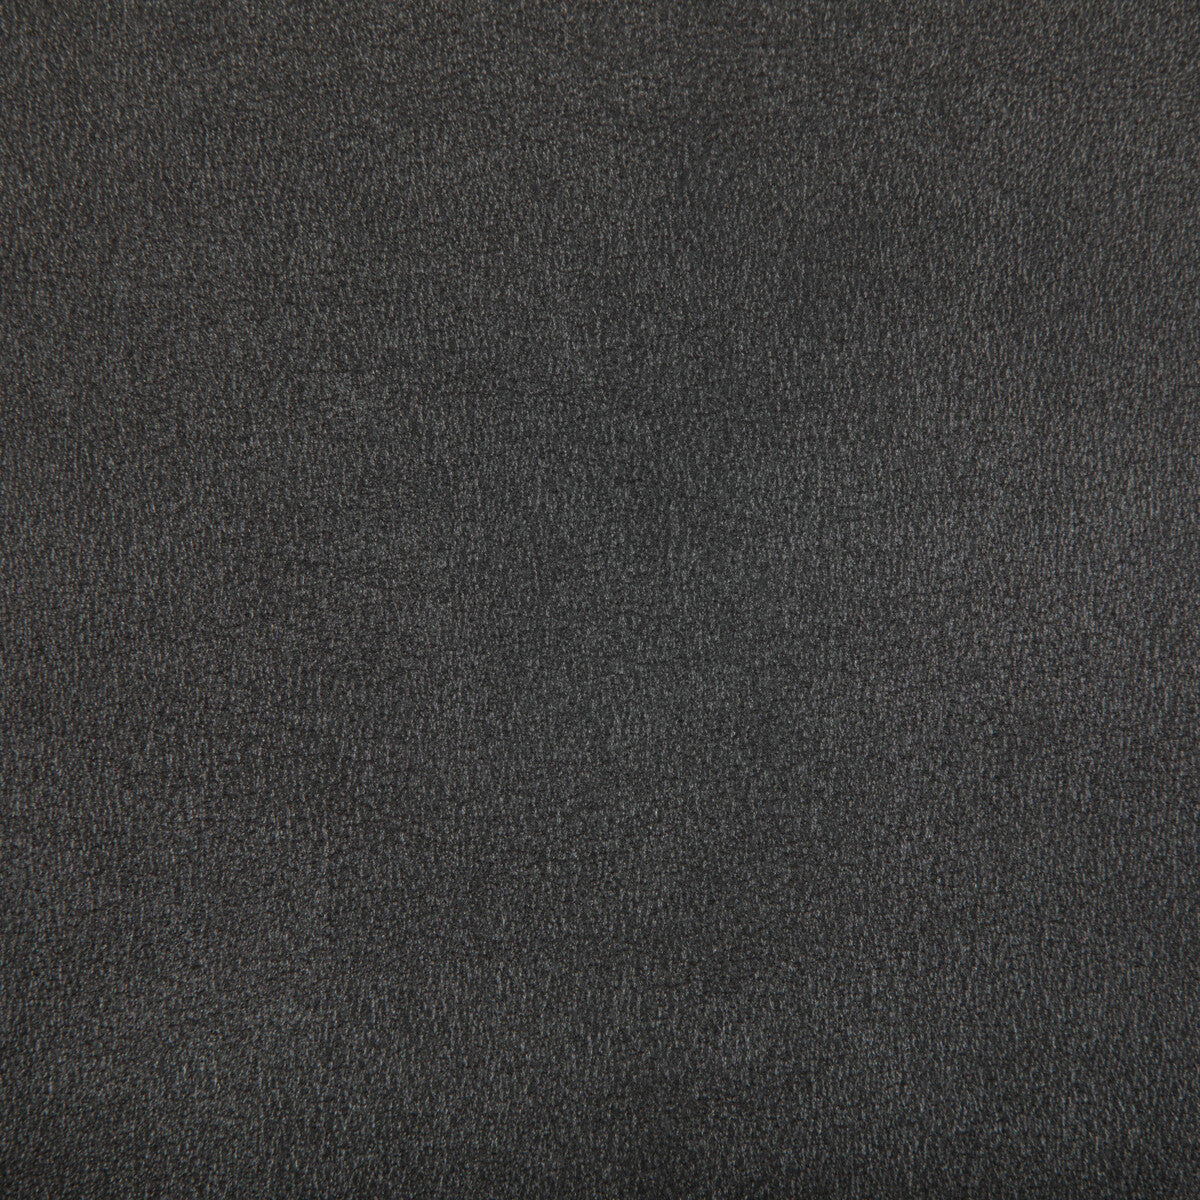 Agatha fabric in graphite color - pattern AGATHA.1121.0 - by Kravet Contract